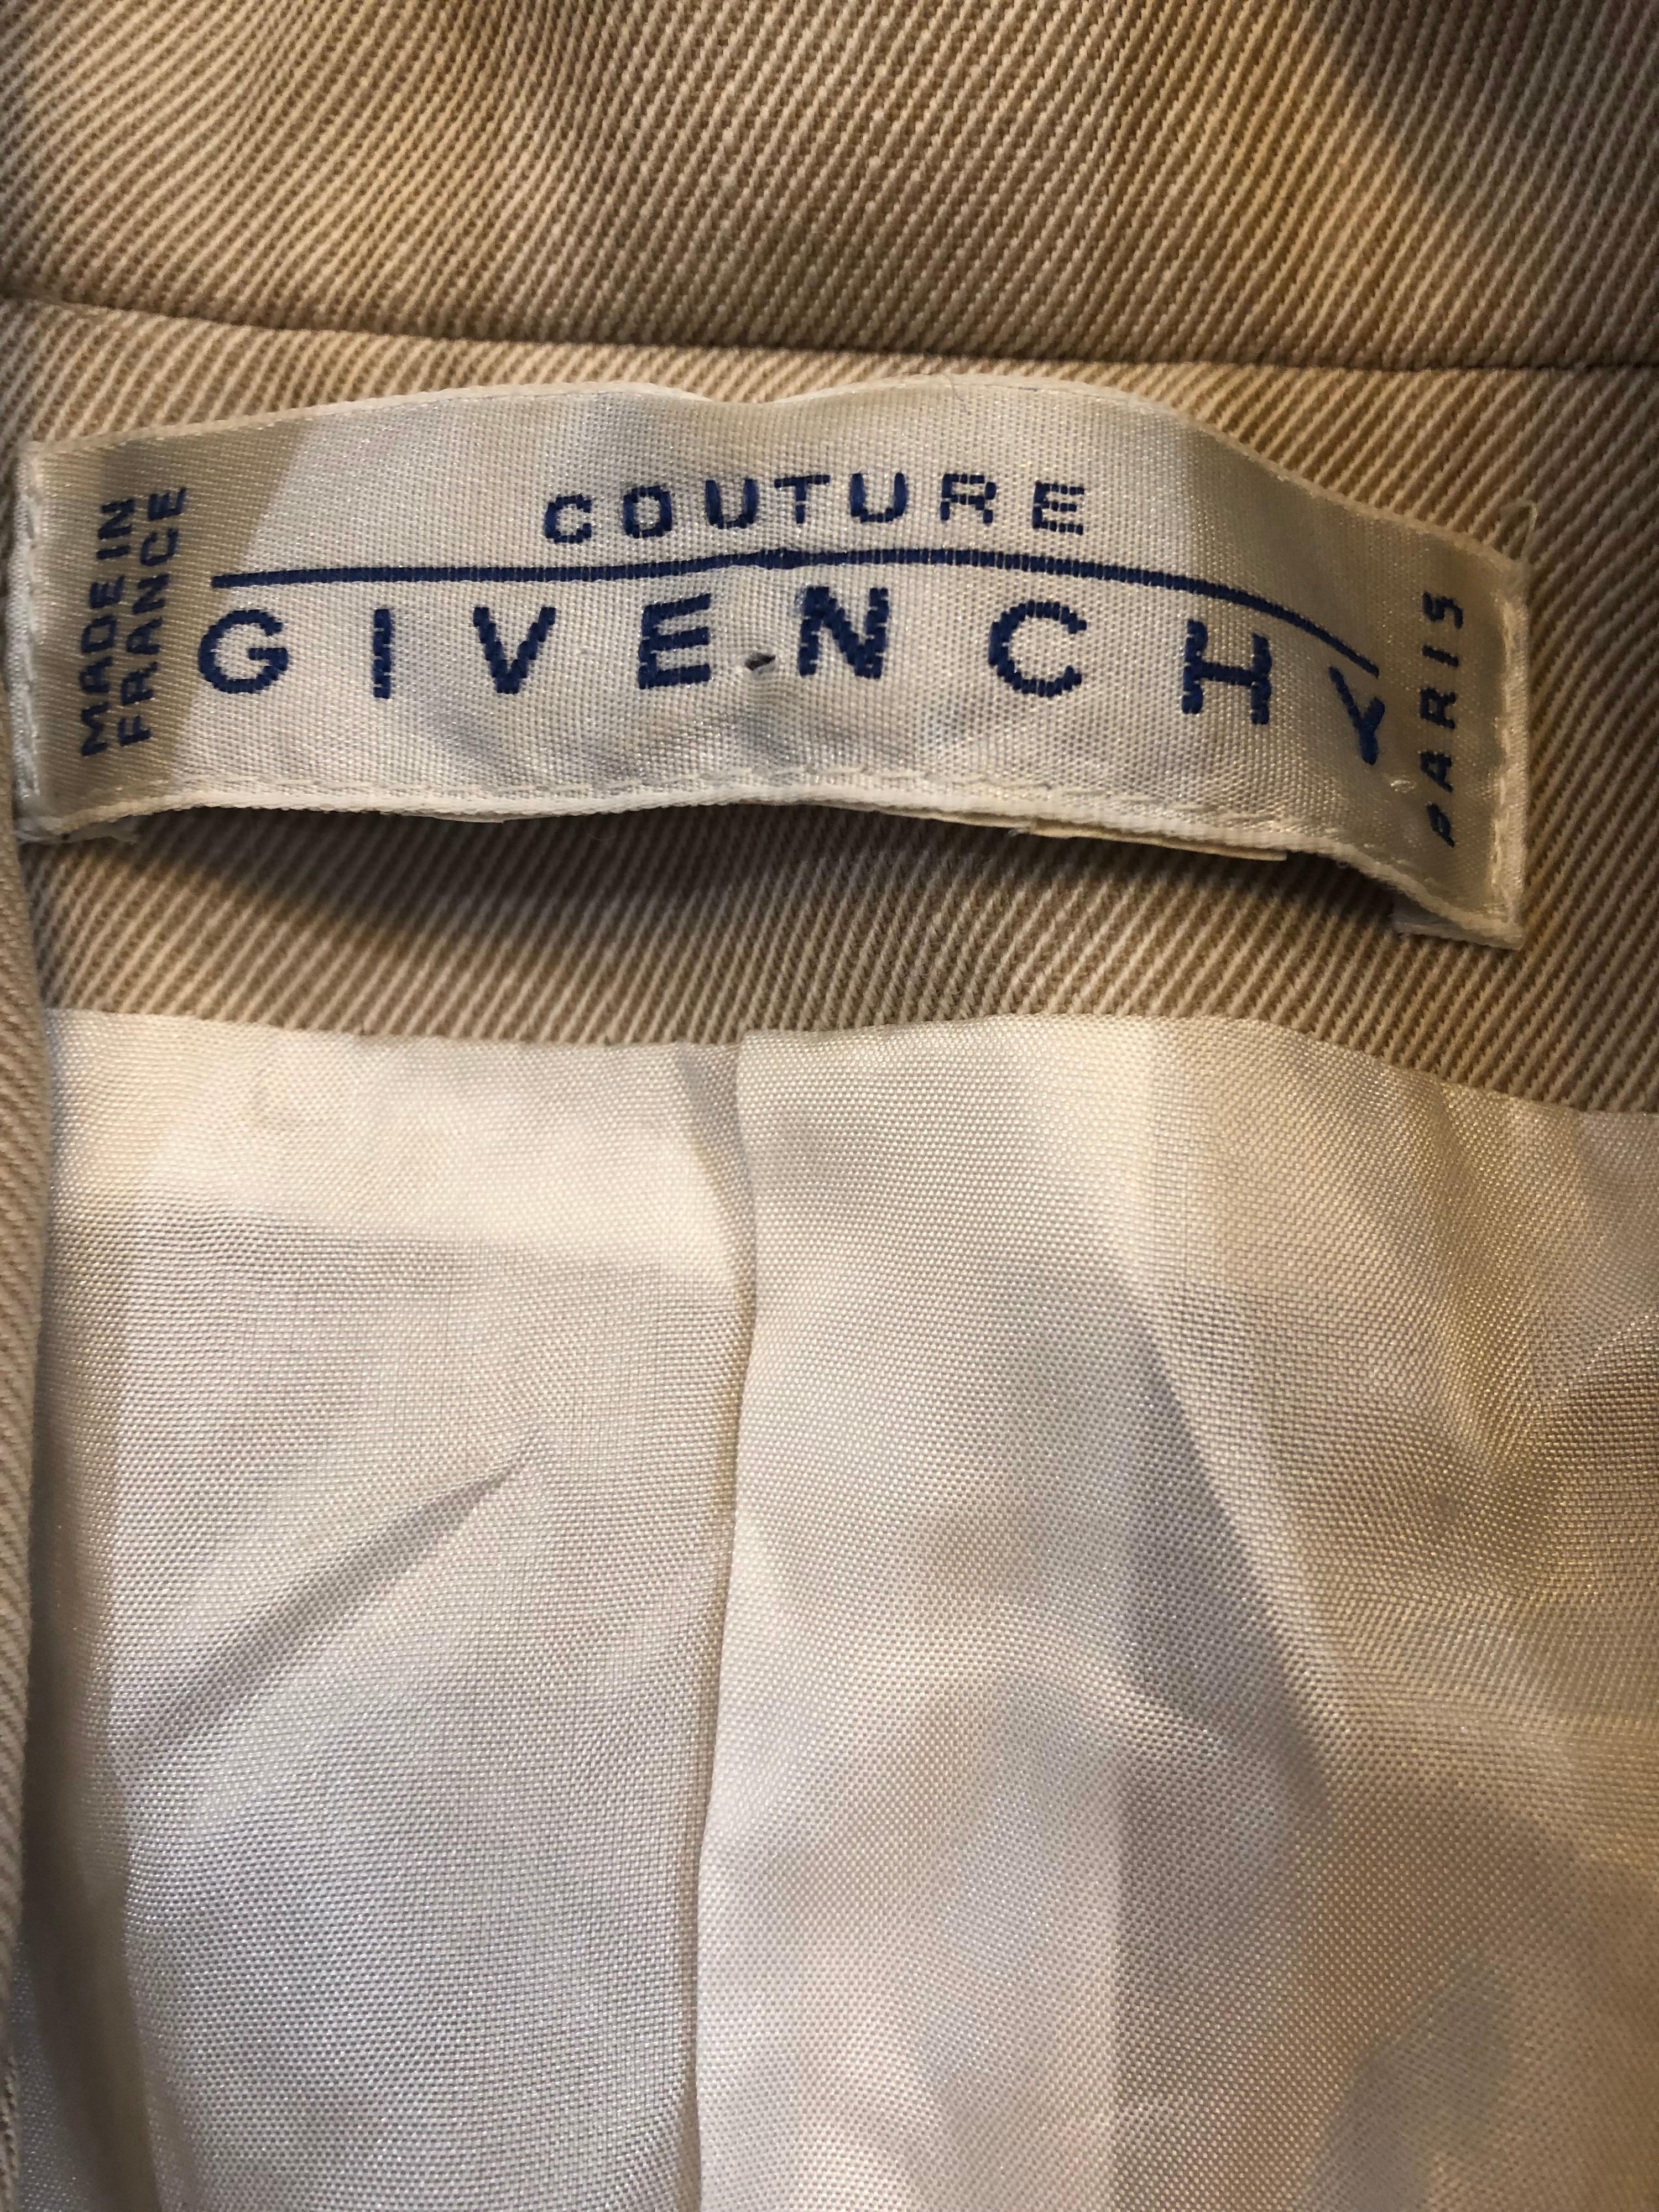 Vintage Givenchy Couture by Alexander McQueen 1990s Khaki Tan 90s Jacket Blazer 8